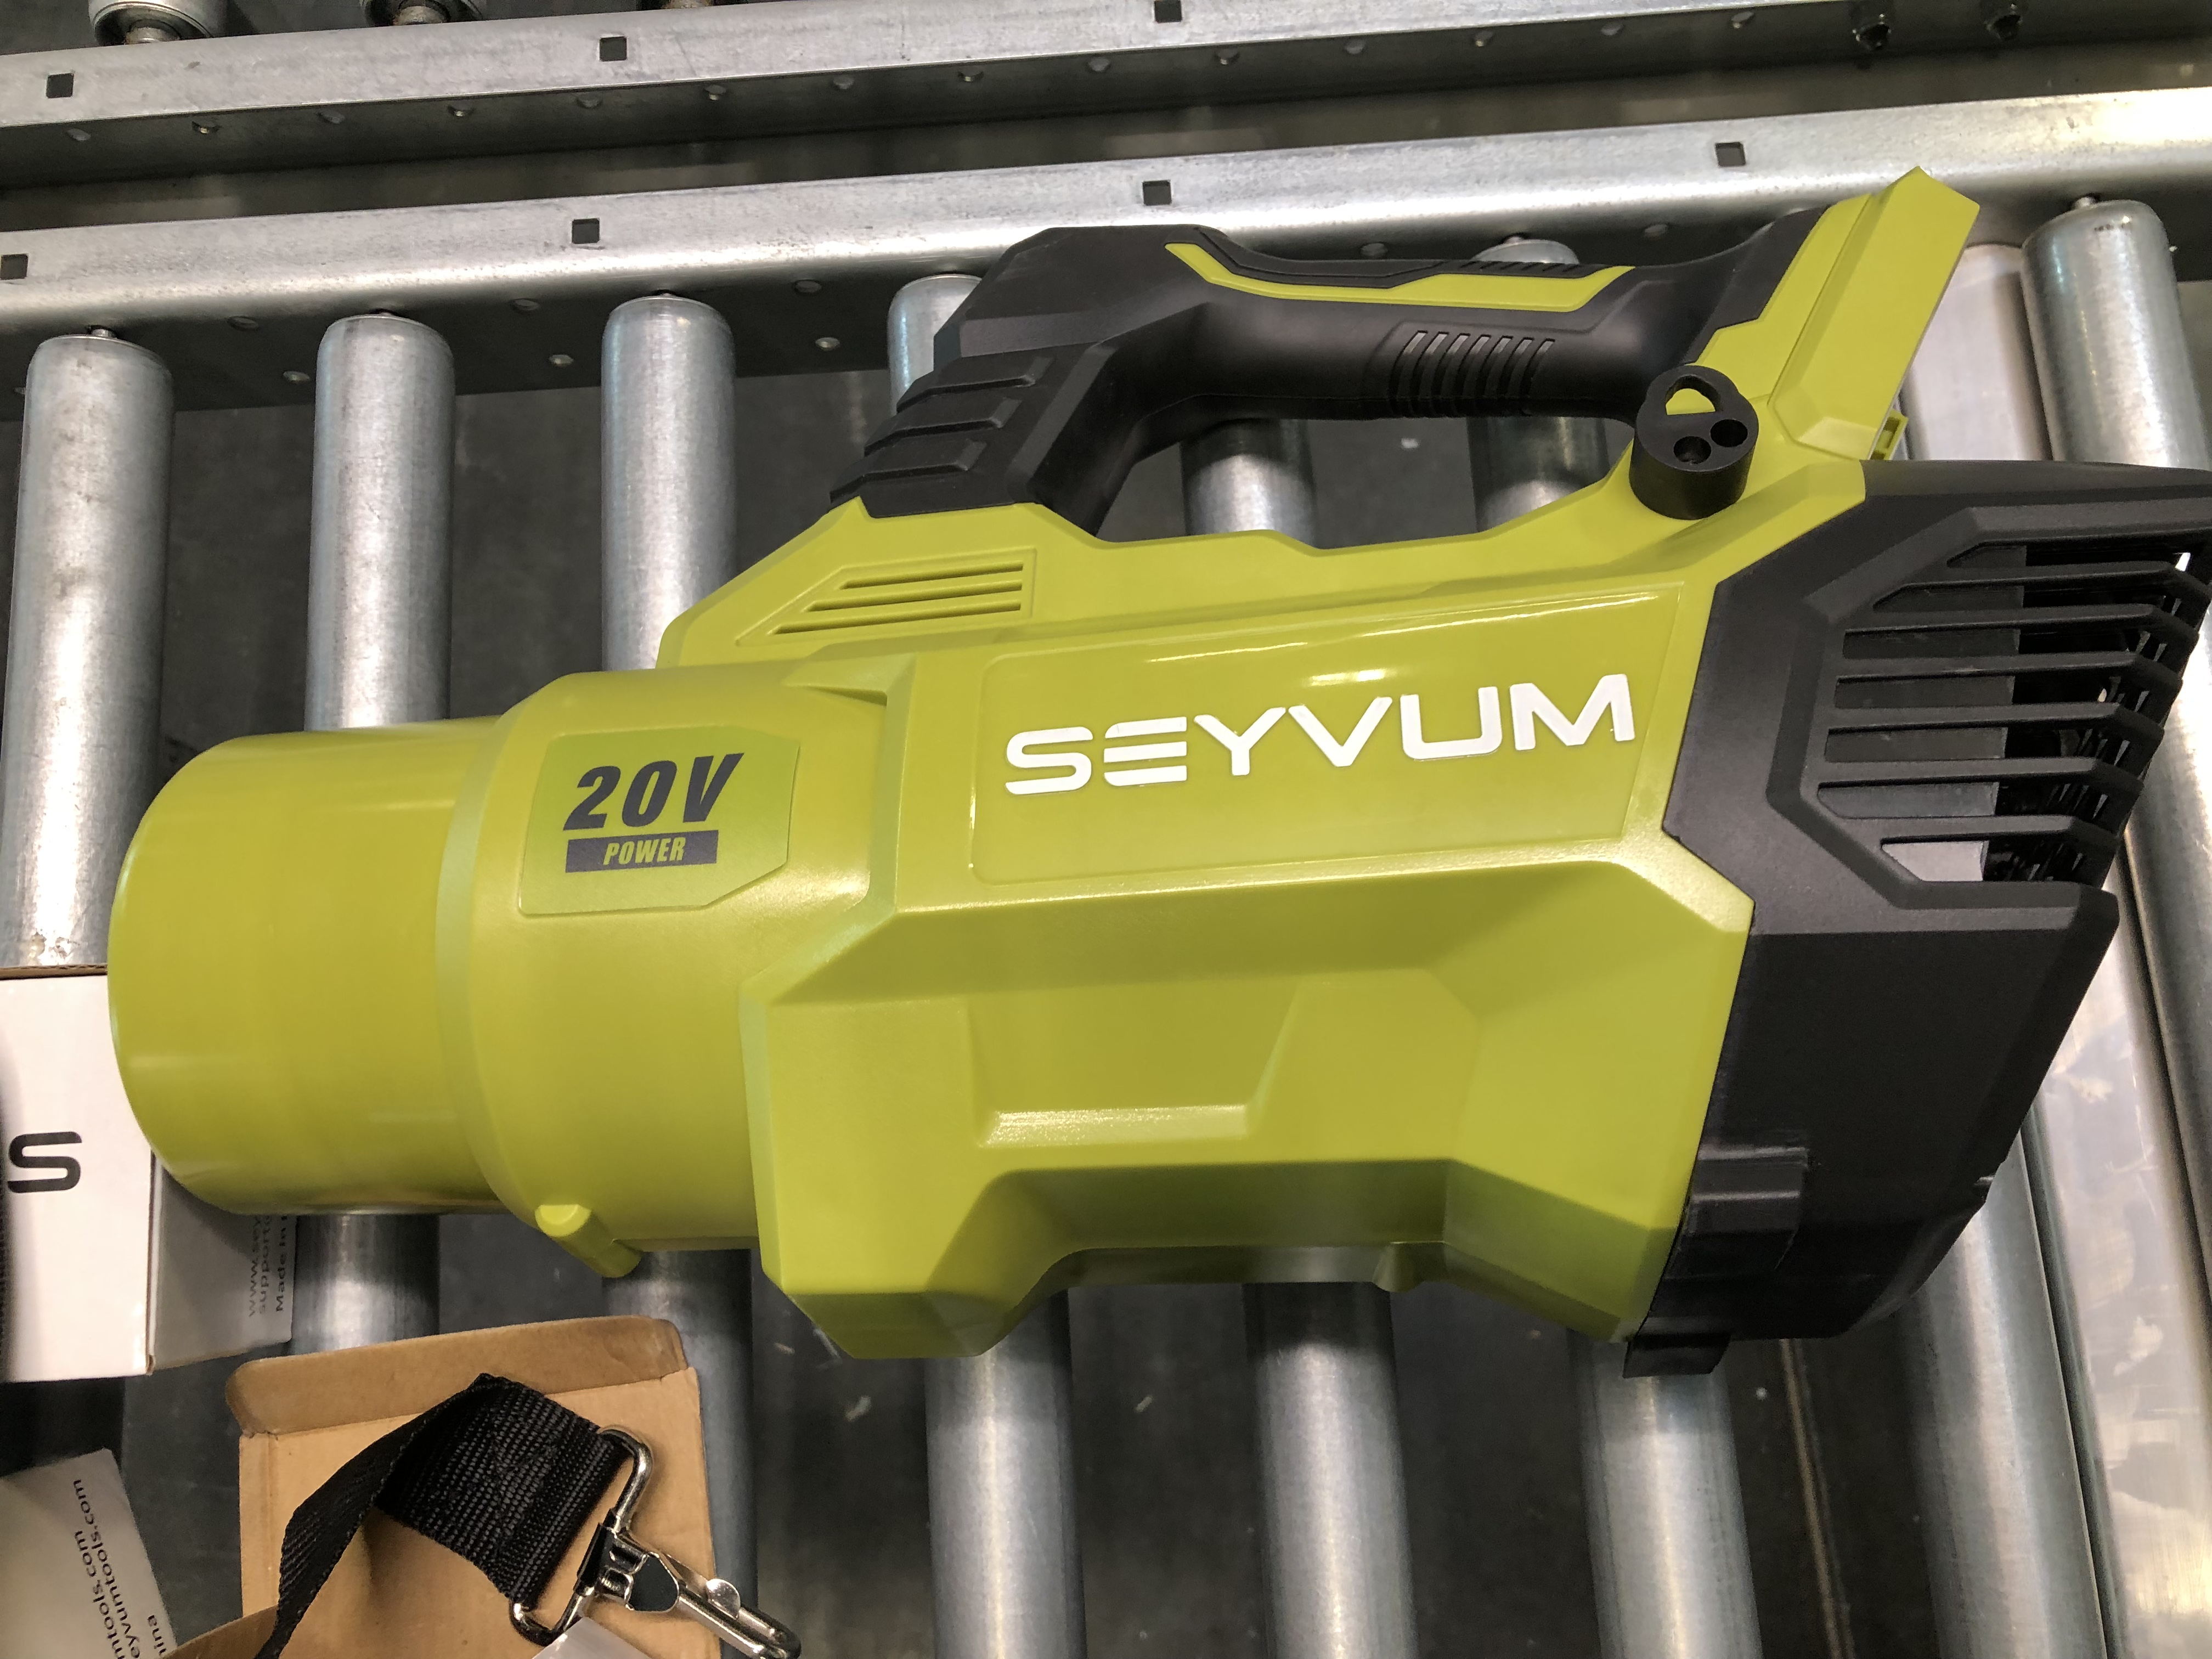 Photo 3 of SEYVUM Leaf Blower - 580CFM 20V Leaf Blower Cordless with 2 X 3.0 Battery & Charger, 3-Speed Dial Electric Handheld Leaf Blower - Lightweight Powerful Blower Battery Operated for Lawn Care | Jobsite